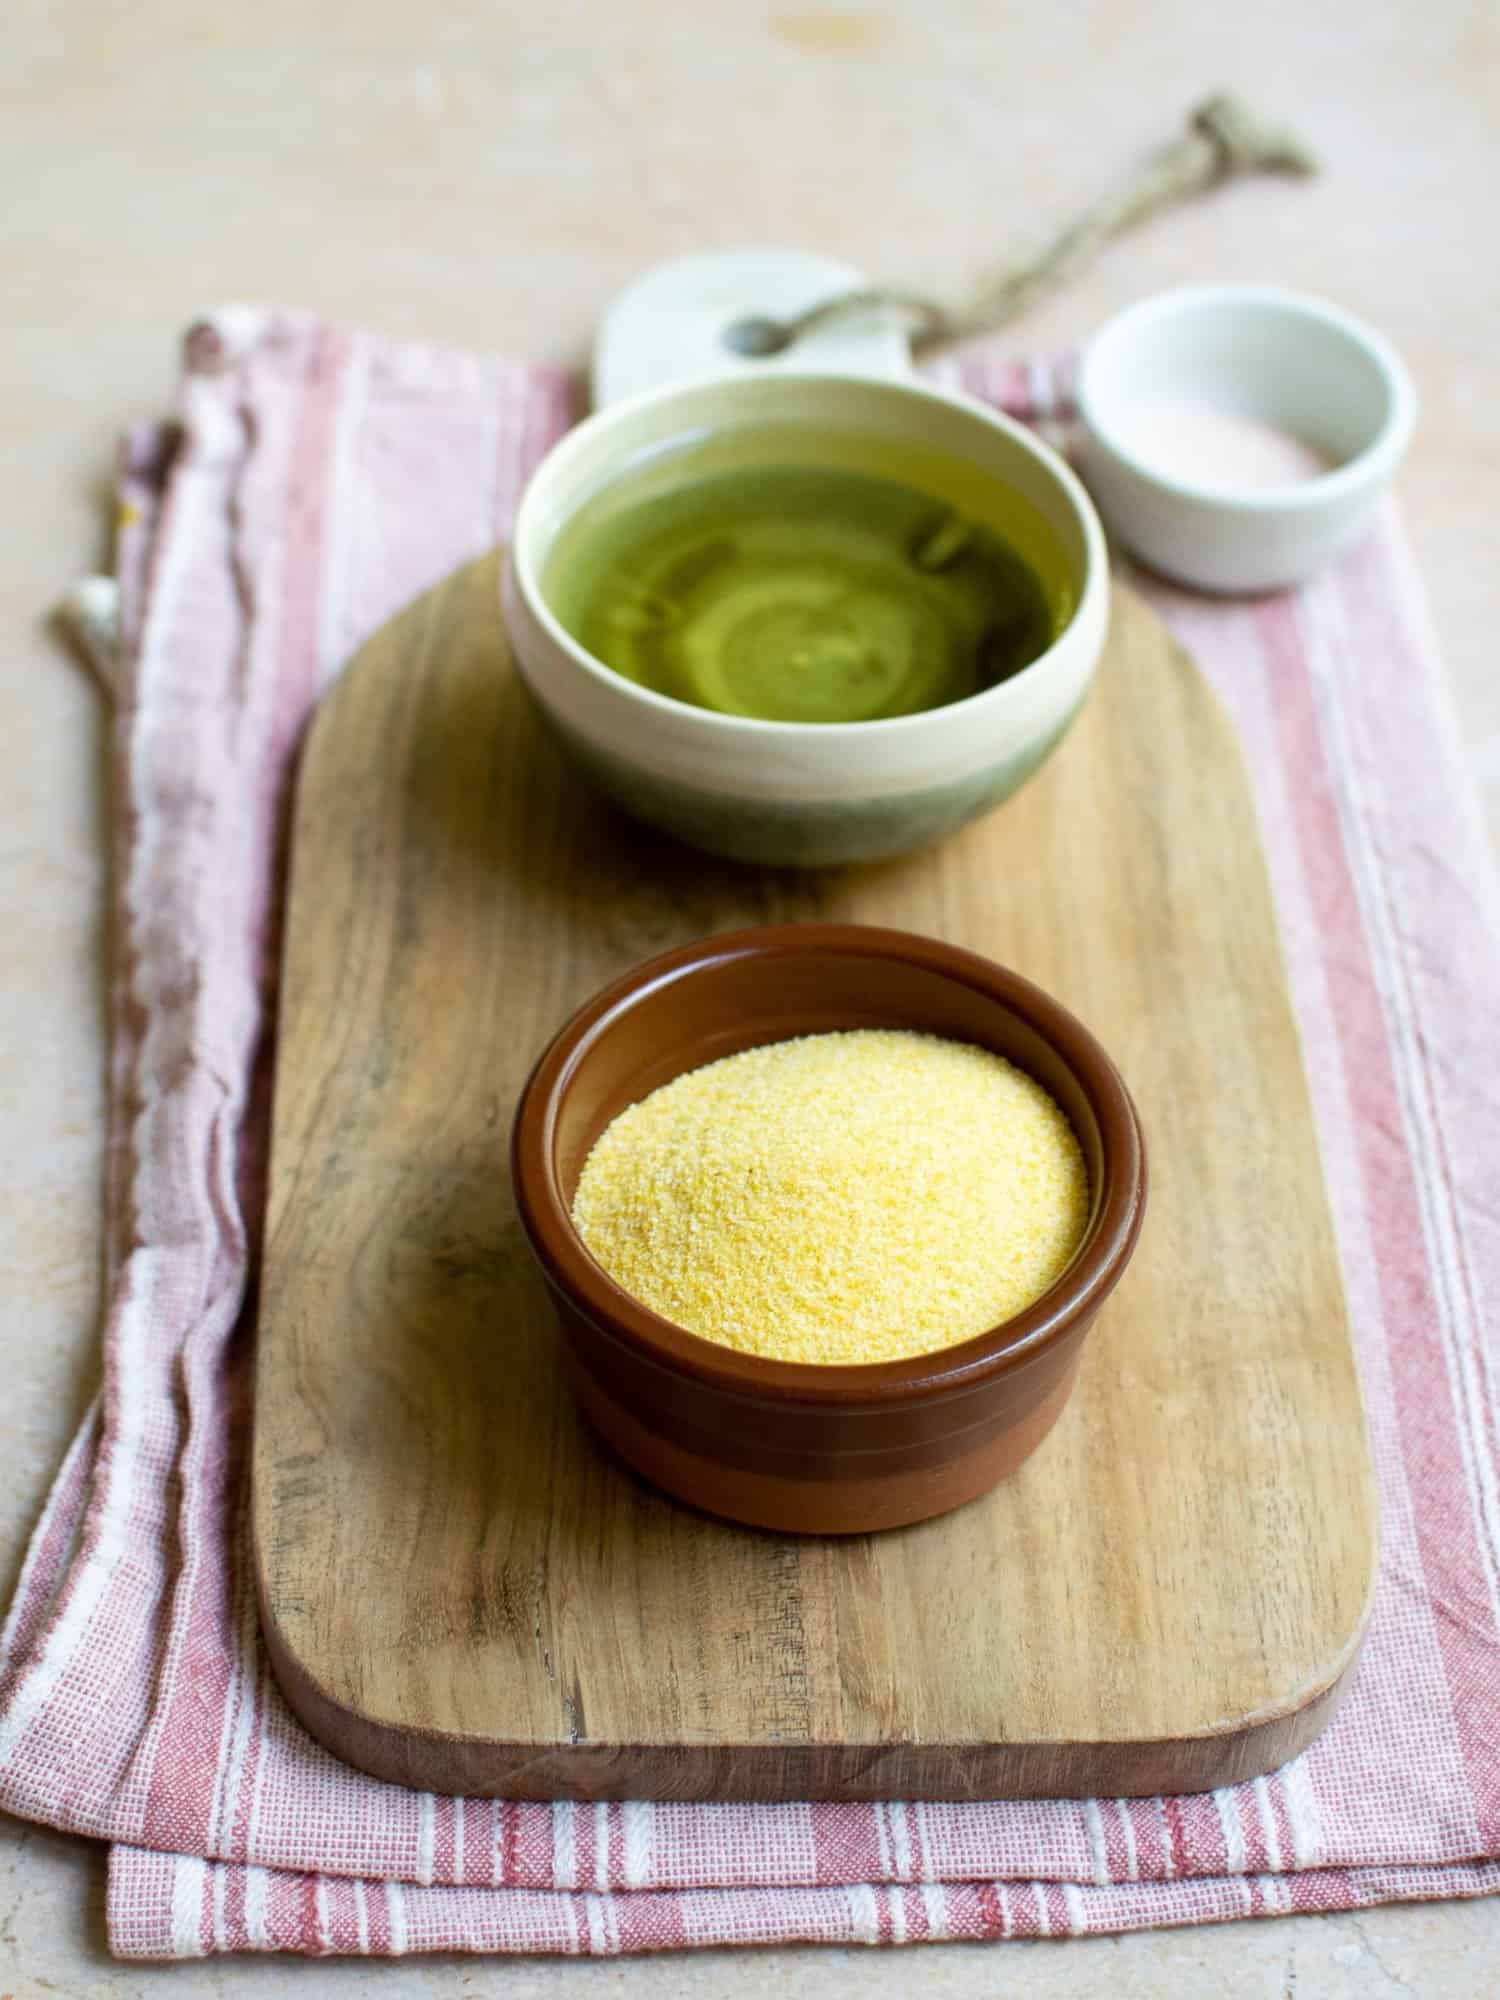 In two separate bowls there is polenta and oil. Set on a chopping board with a pink cloth underneath it